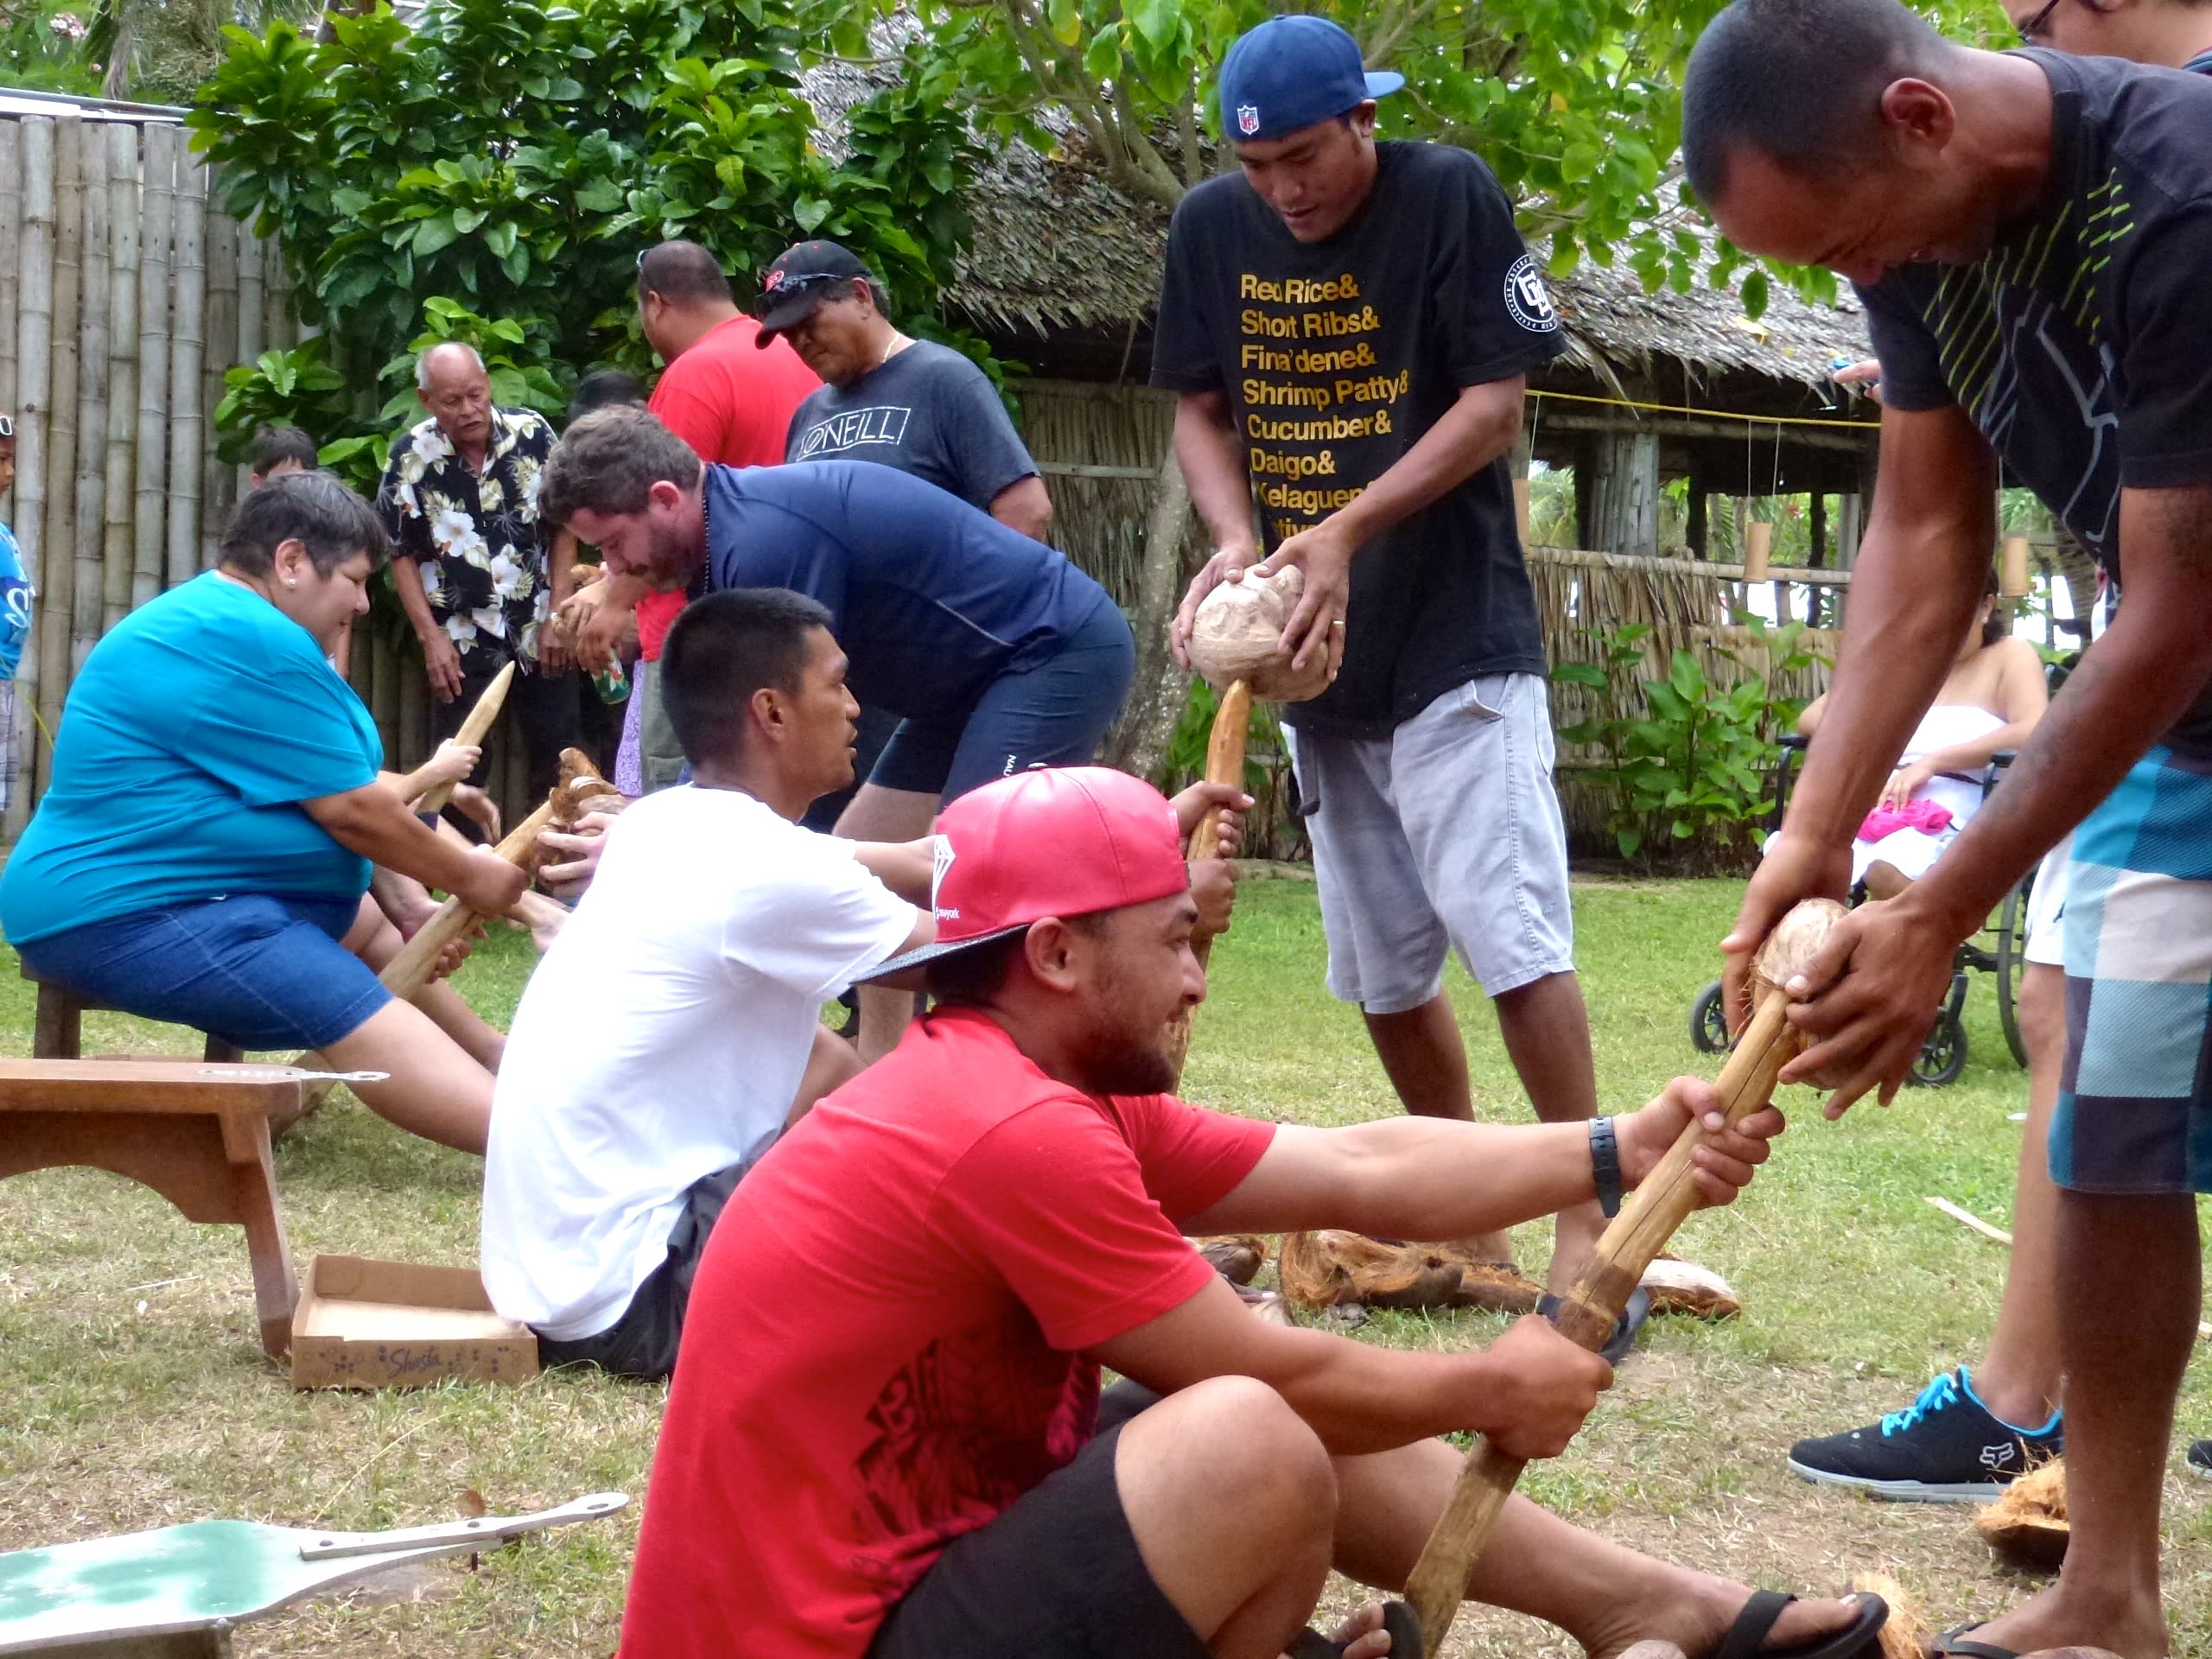 The coconut husking contest is one of many games held during the festival